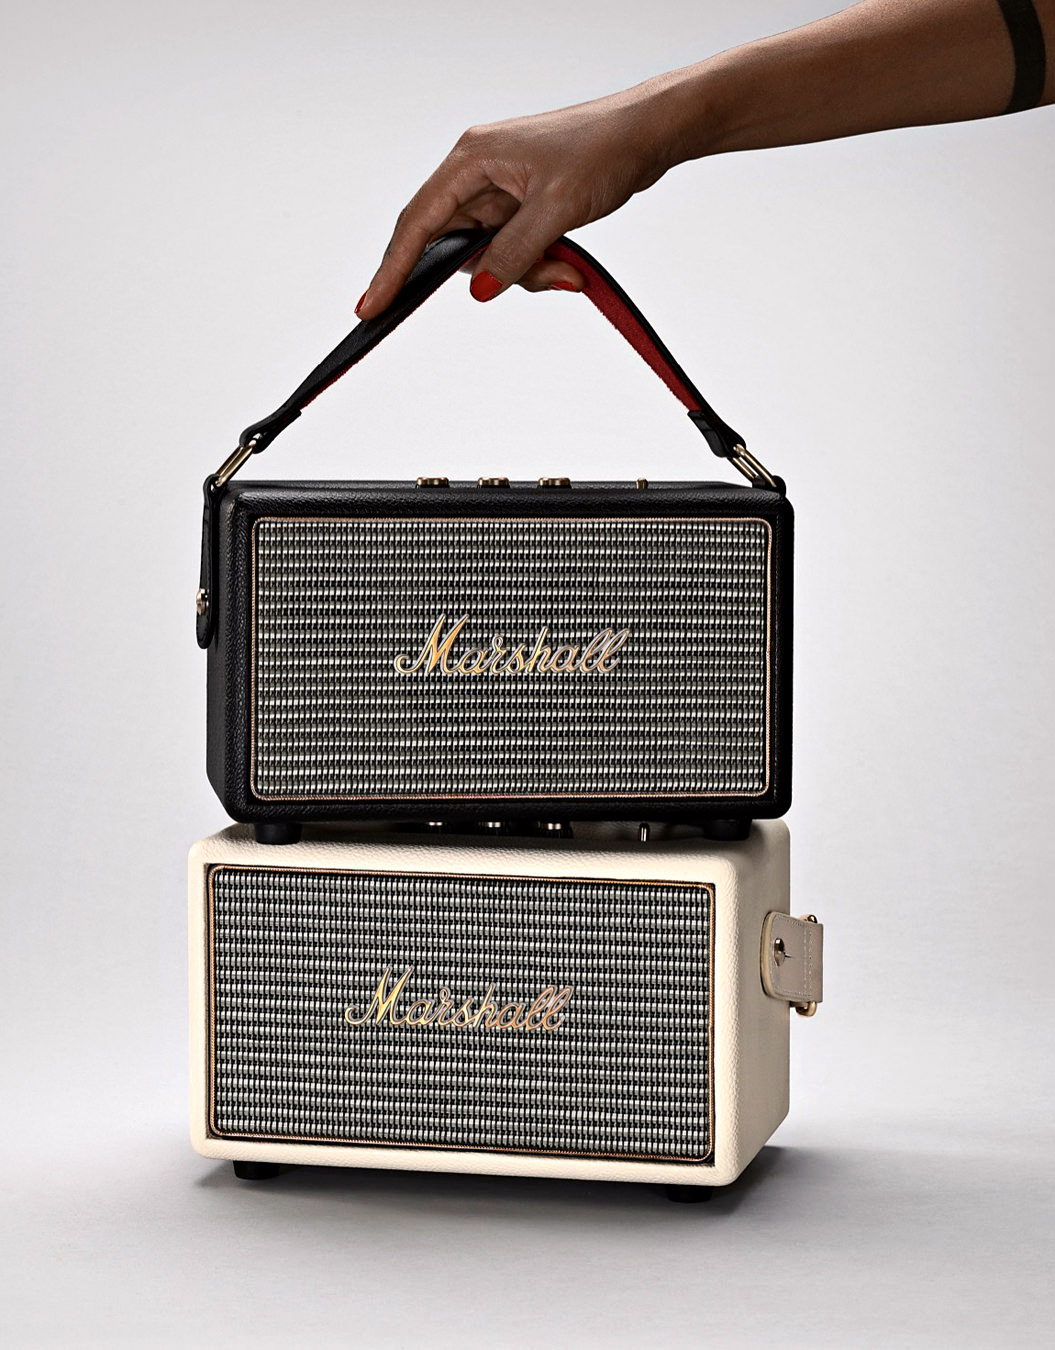 NUVO Winter 2015: Marshall Speakers and Headphones, Of Note